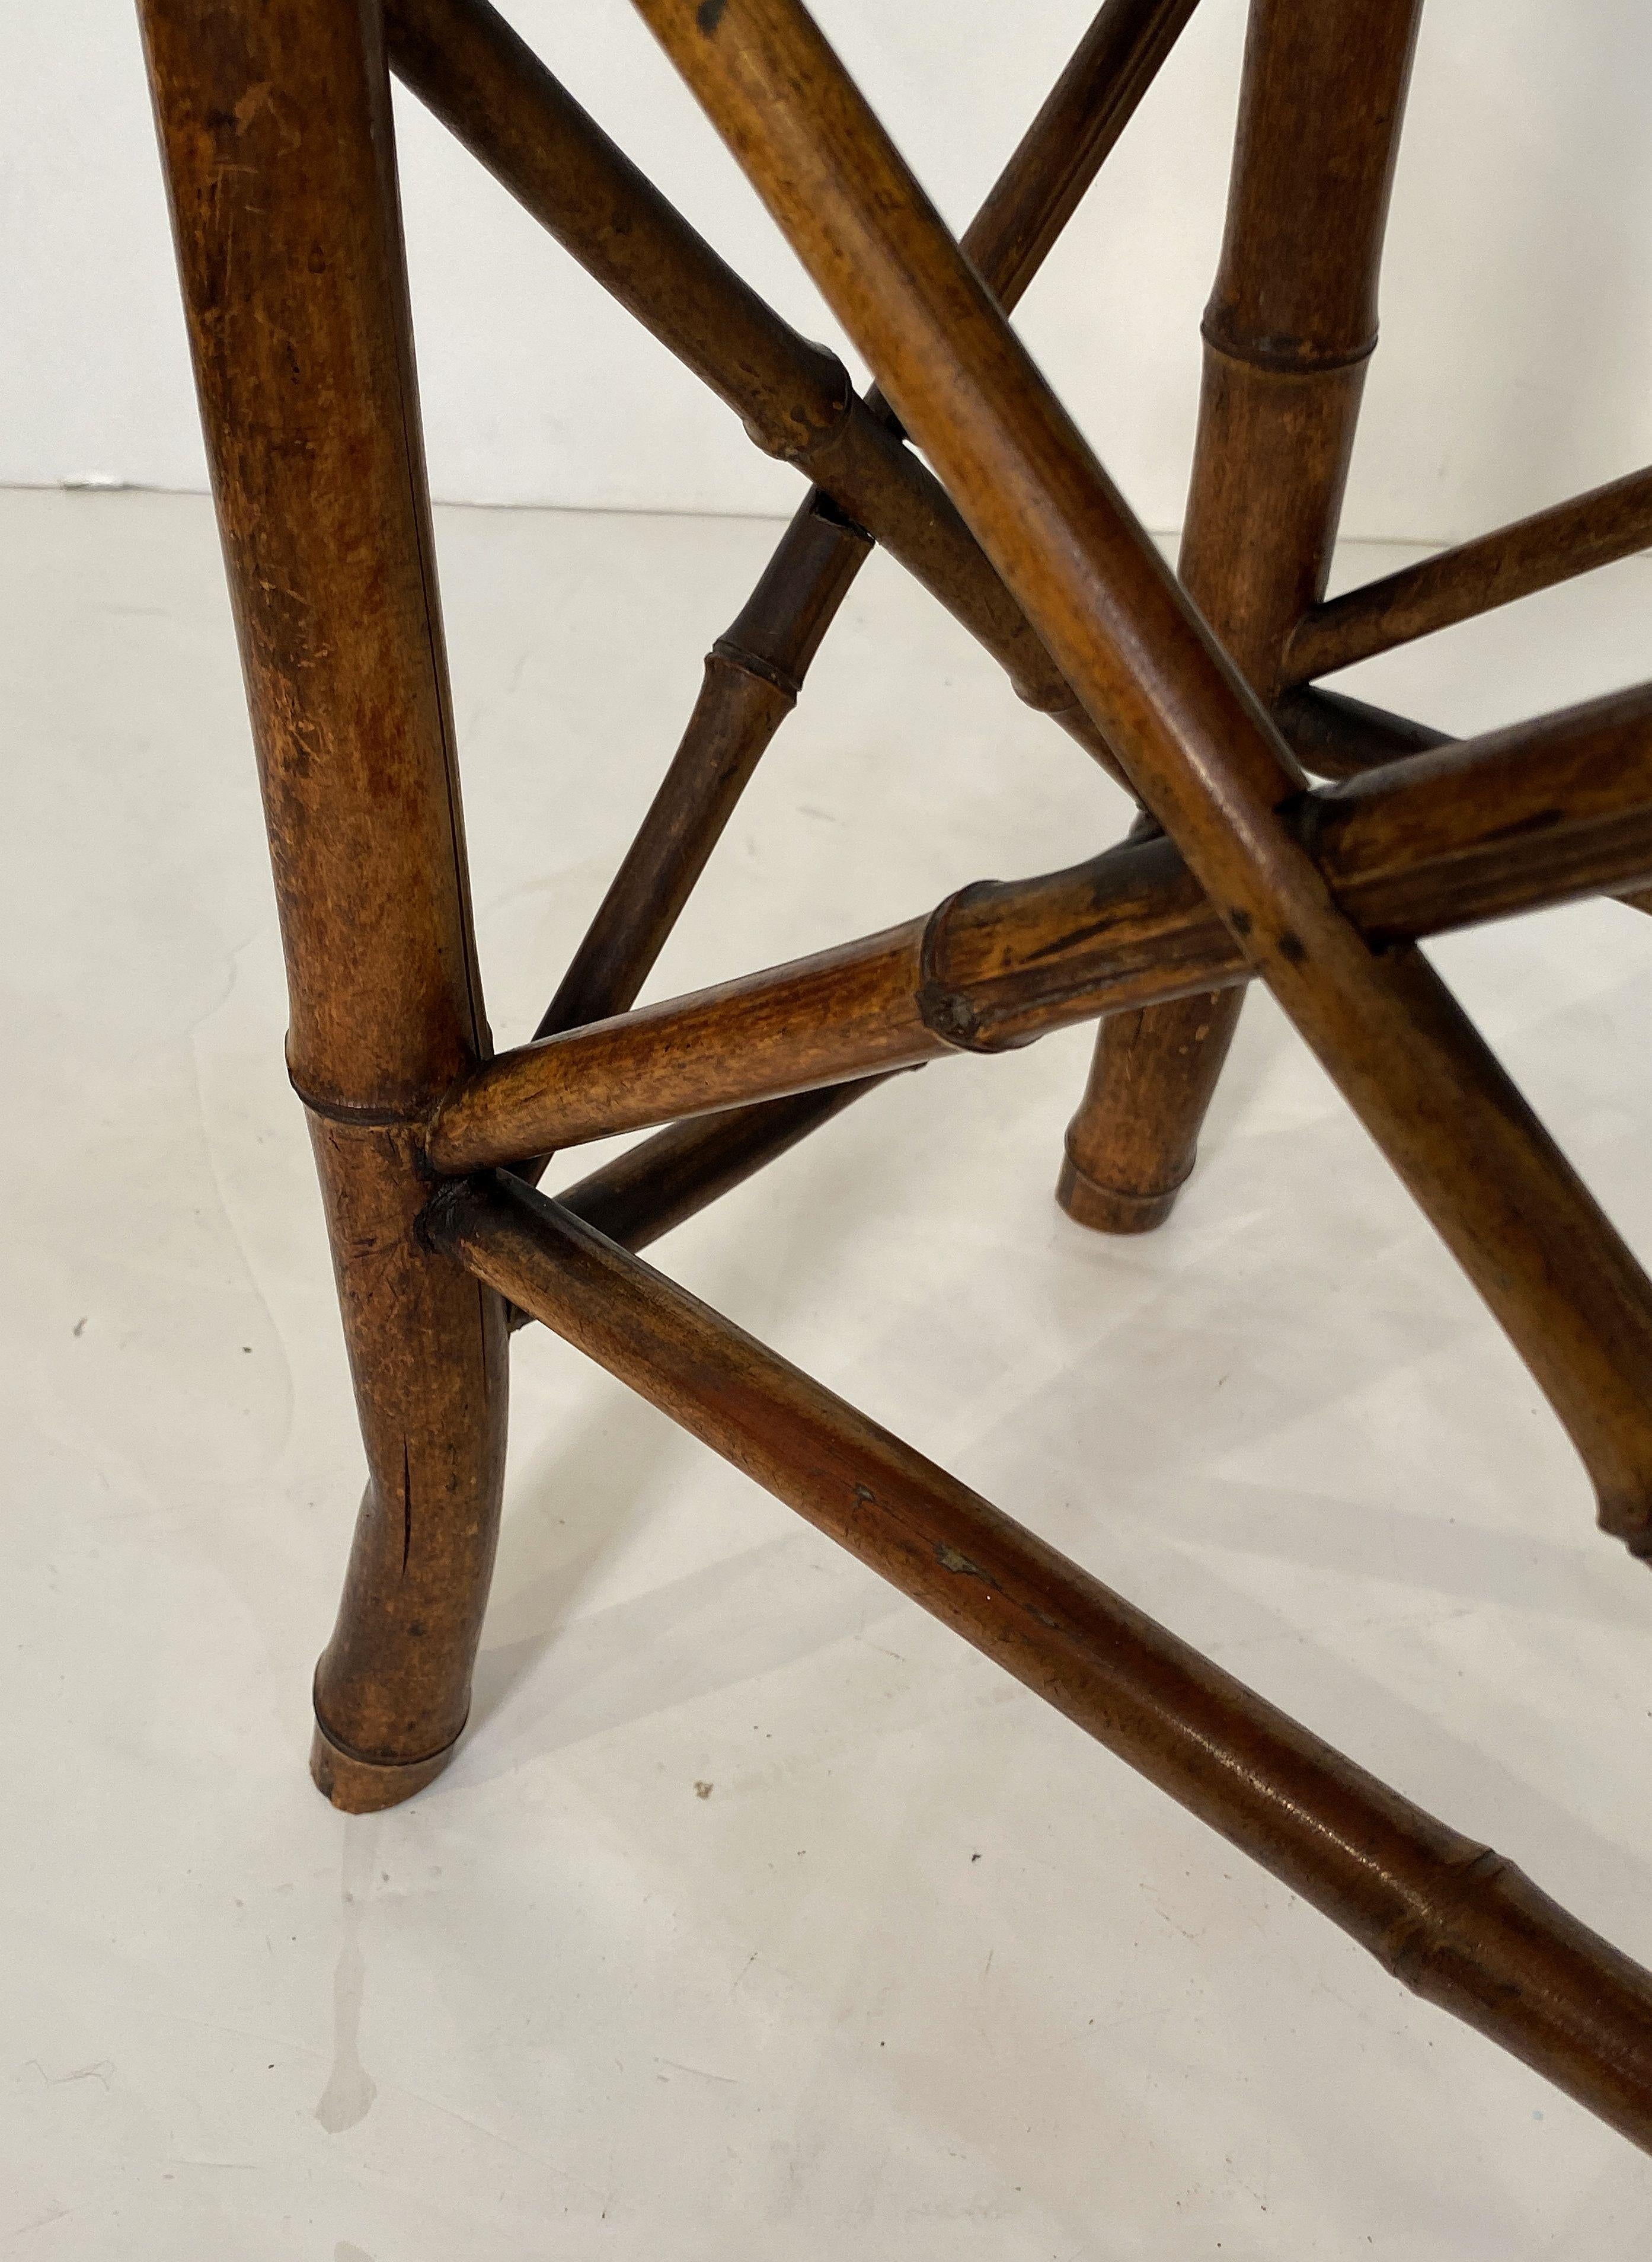 English Bamboo Bench or Stool with Saddle Seat from the Aesthetic Movement Era For Sale 14